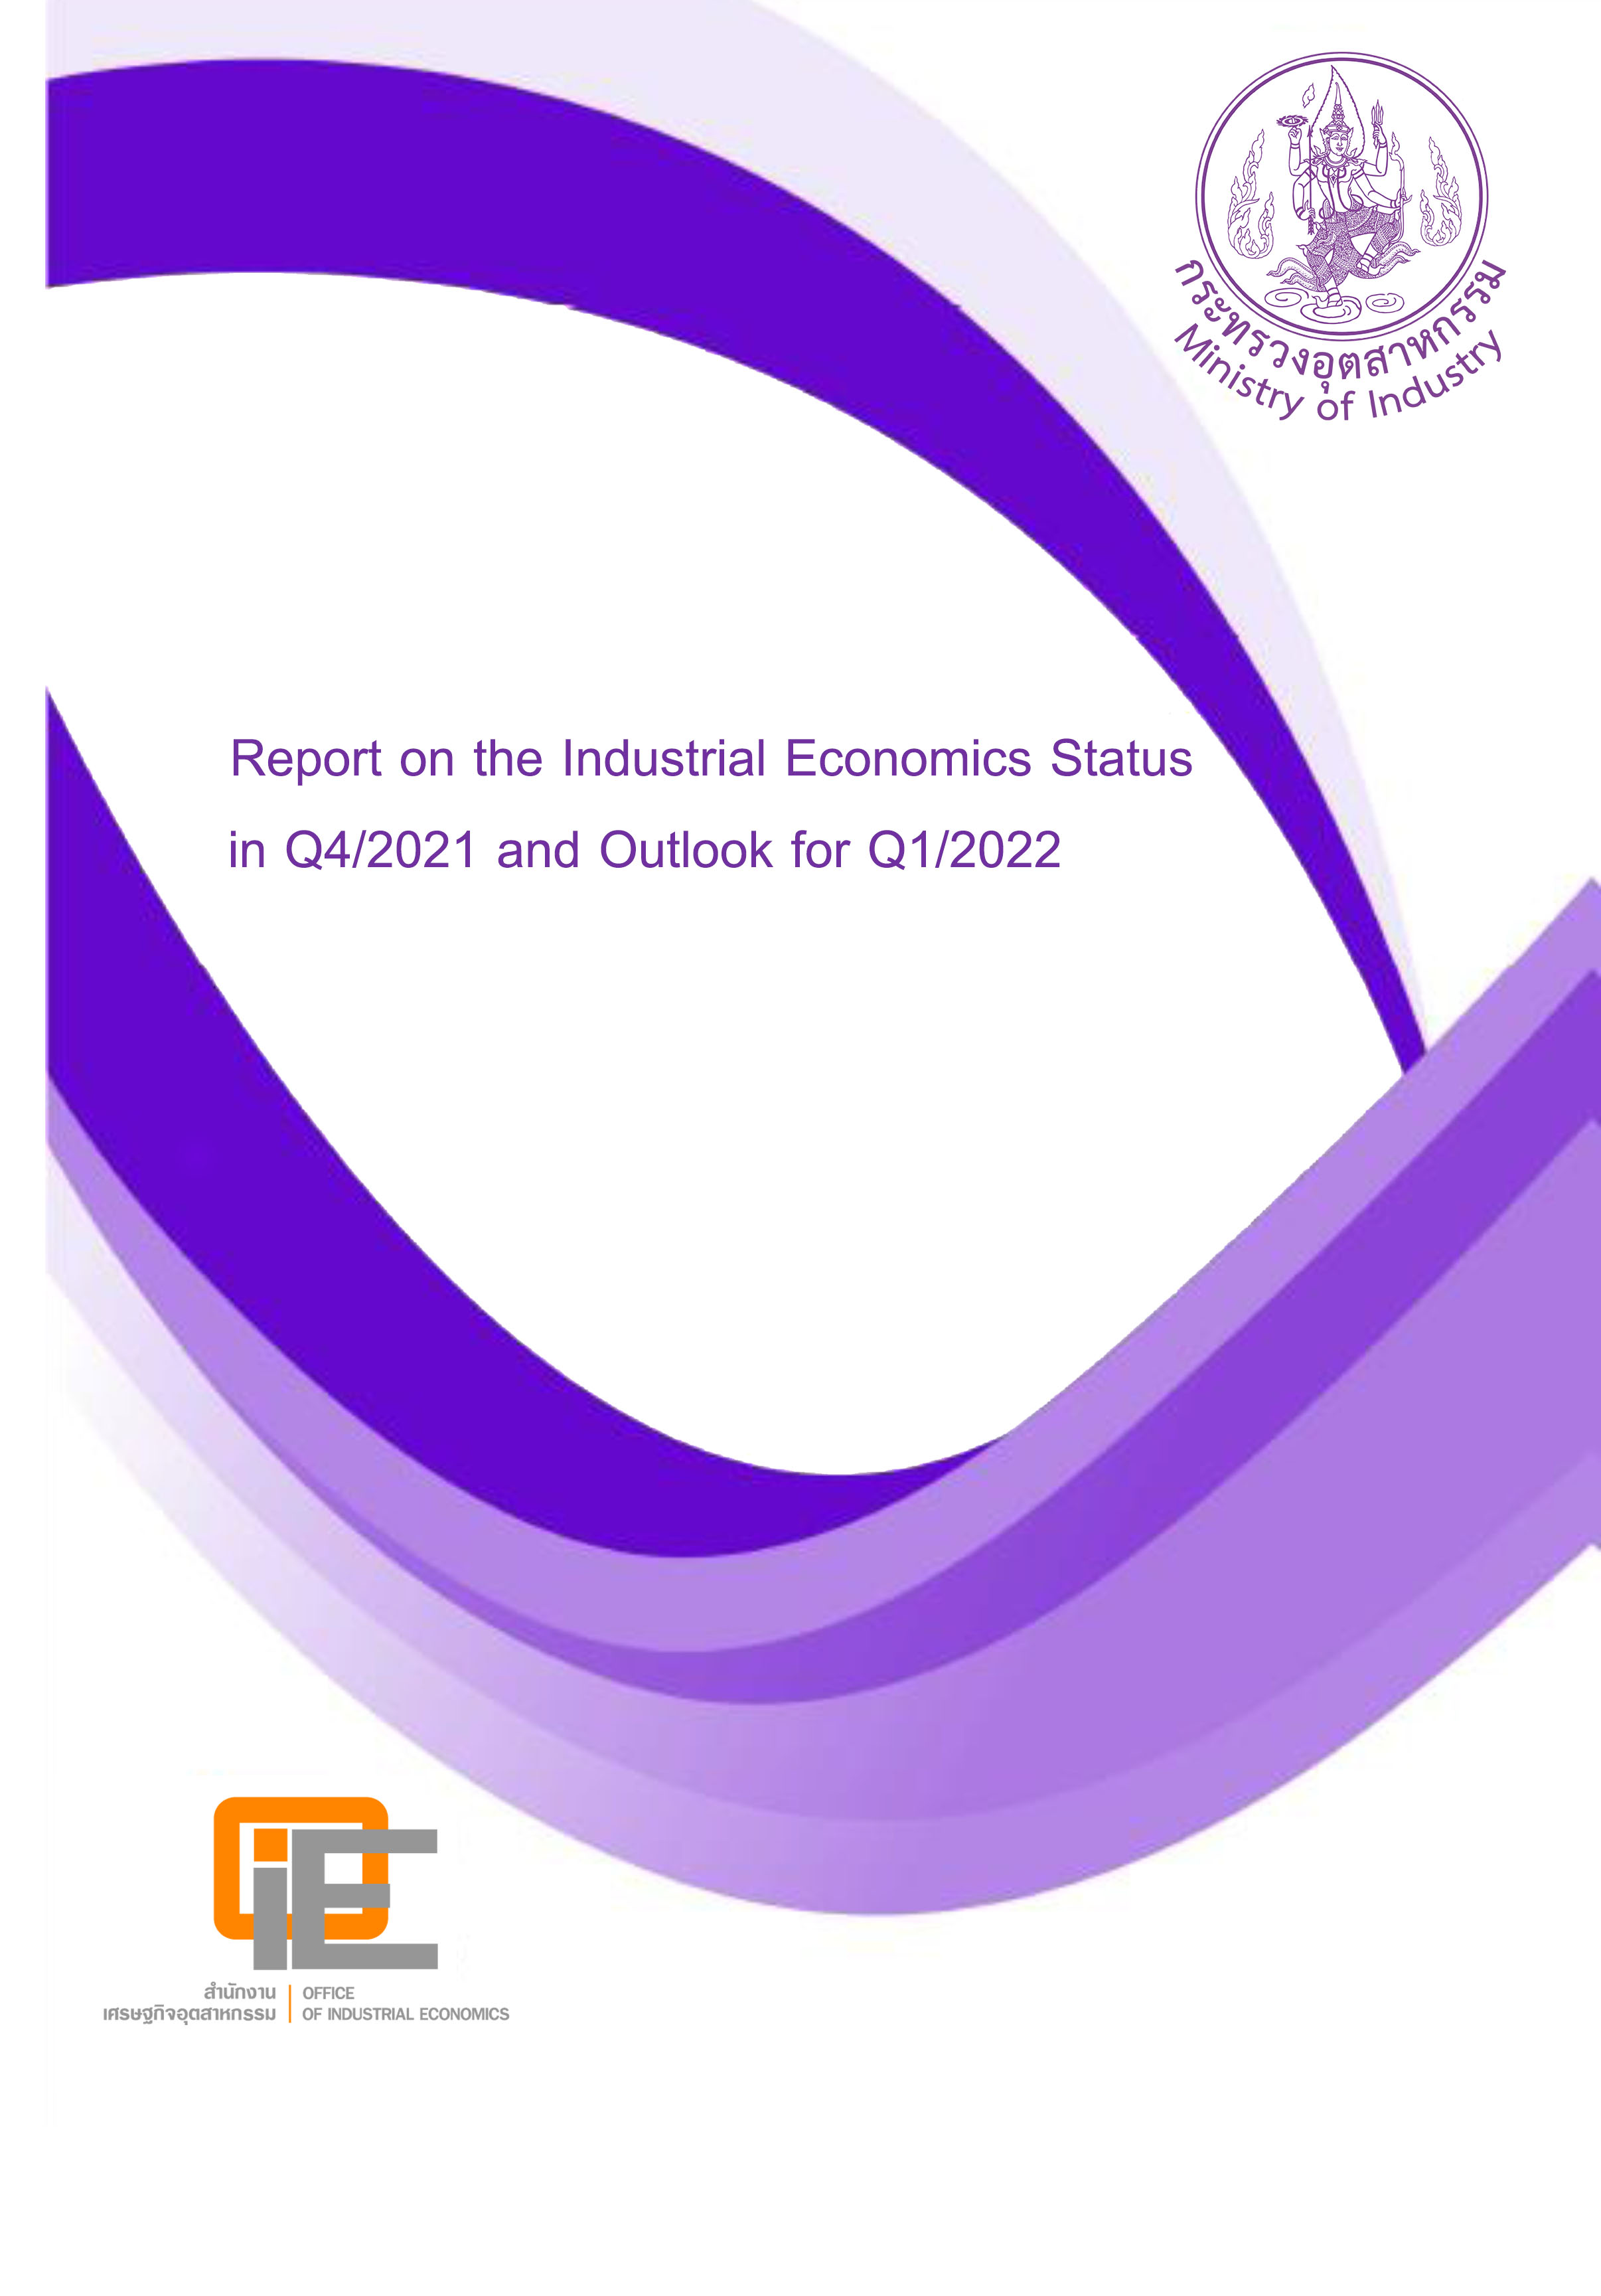 Report on the Industrial Economics Status in Q4/2021 and Outlook for Q1/2022